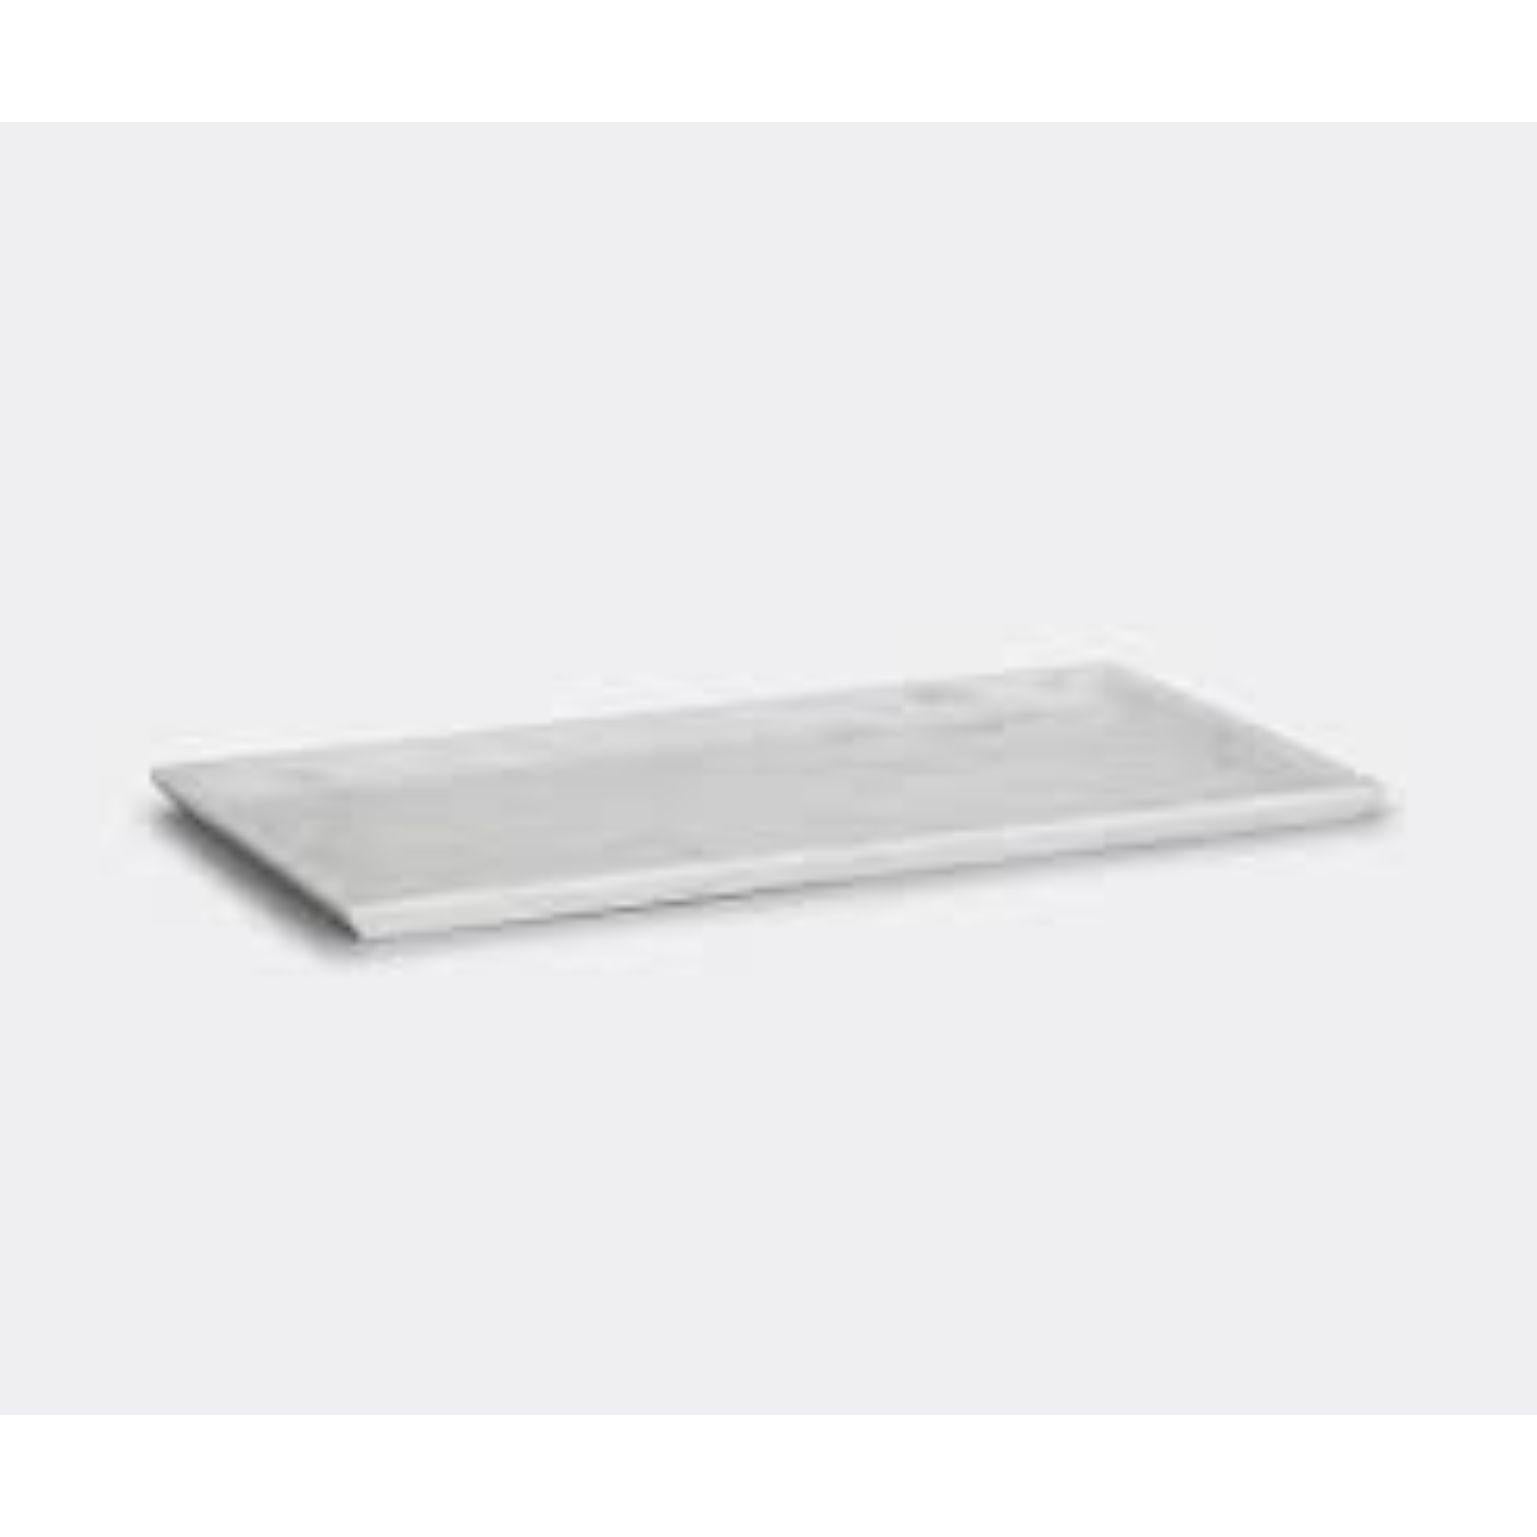 Vasco tray - Bianco Carrara by Studioformart
Total Marble Collection
Dimensions: 40 x 20 x 2 cm
Materials: Bianco Carrara

Also available: Calacatta Oro

The history of marble carving is lost in time; in one breath, it takes us back to the IV